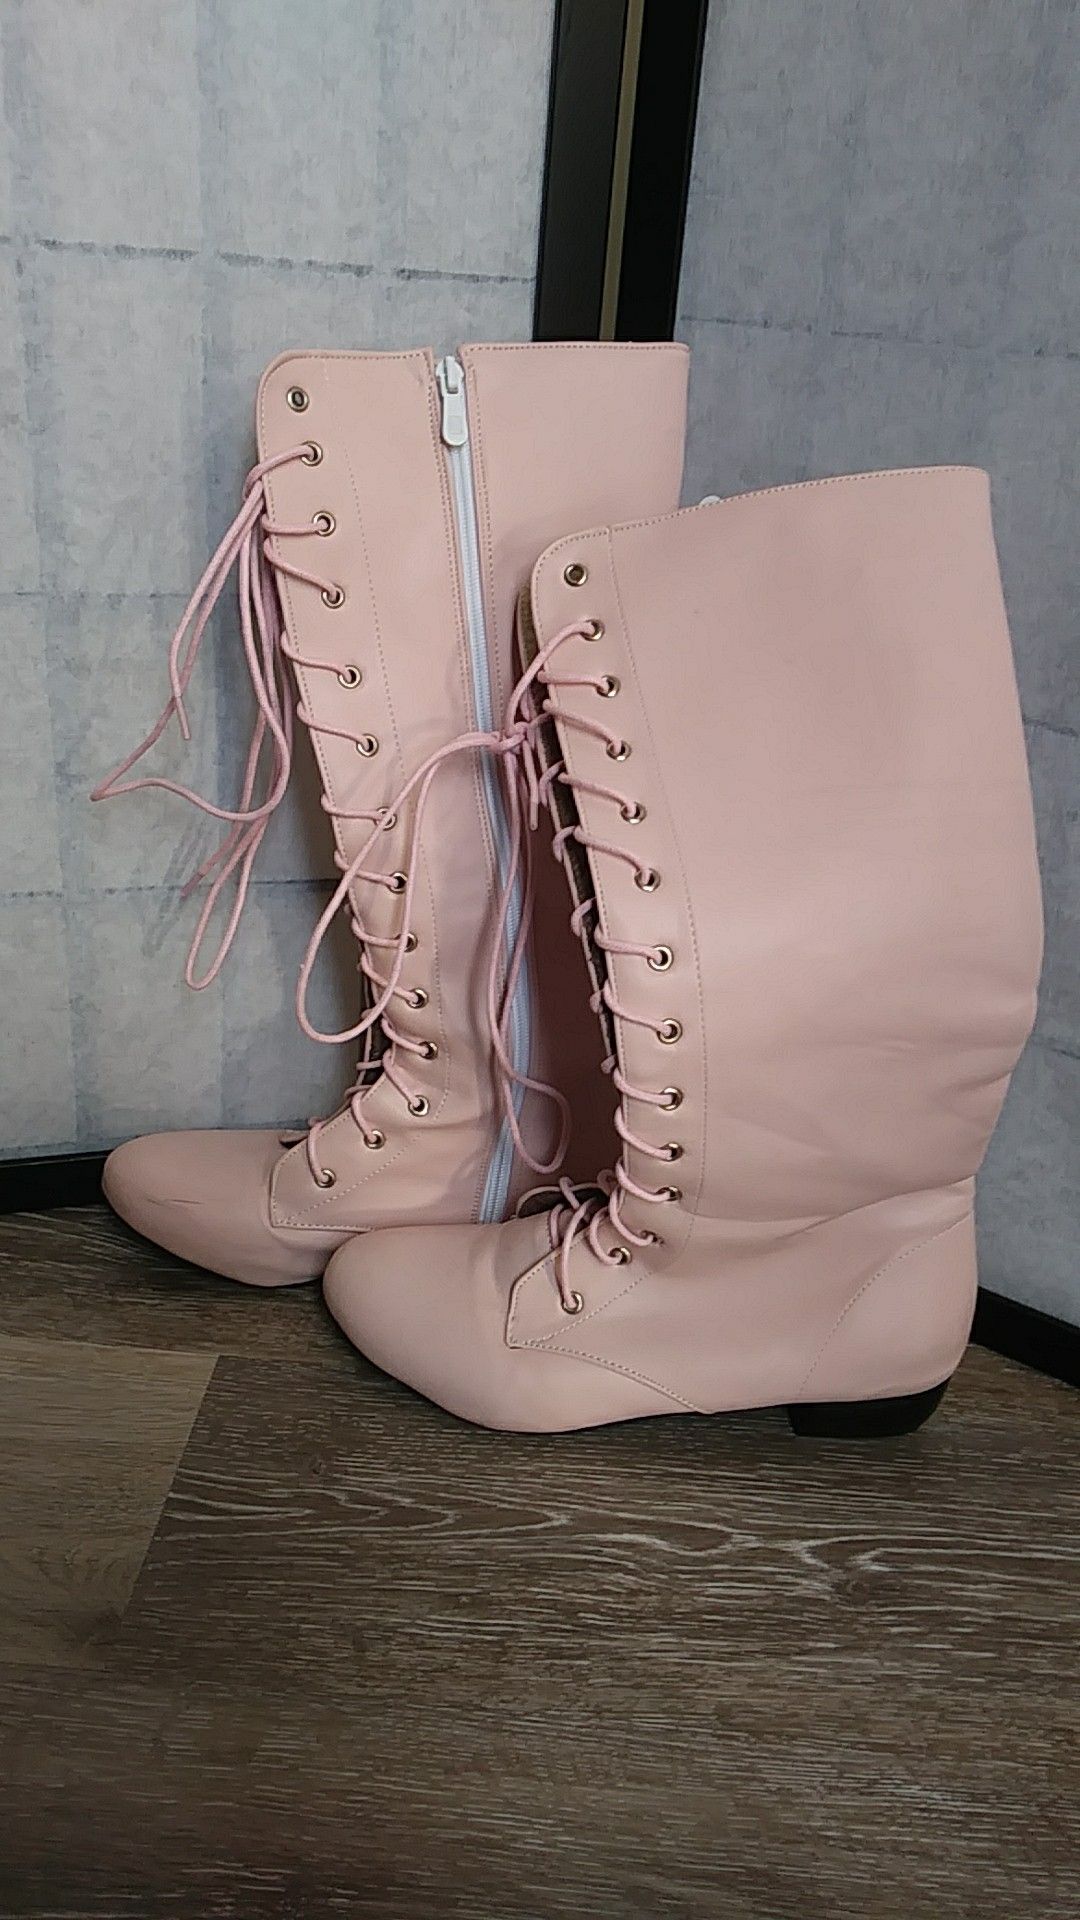 Pink knee high boots 8 to 81/2